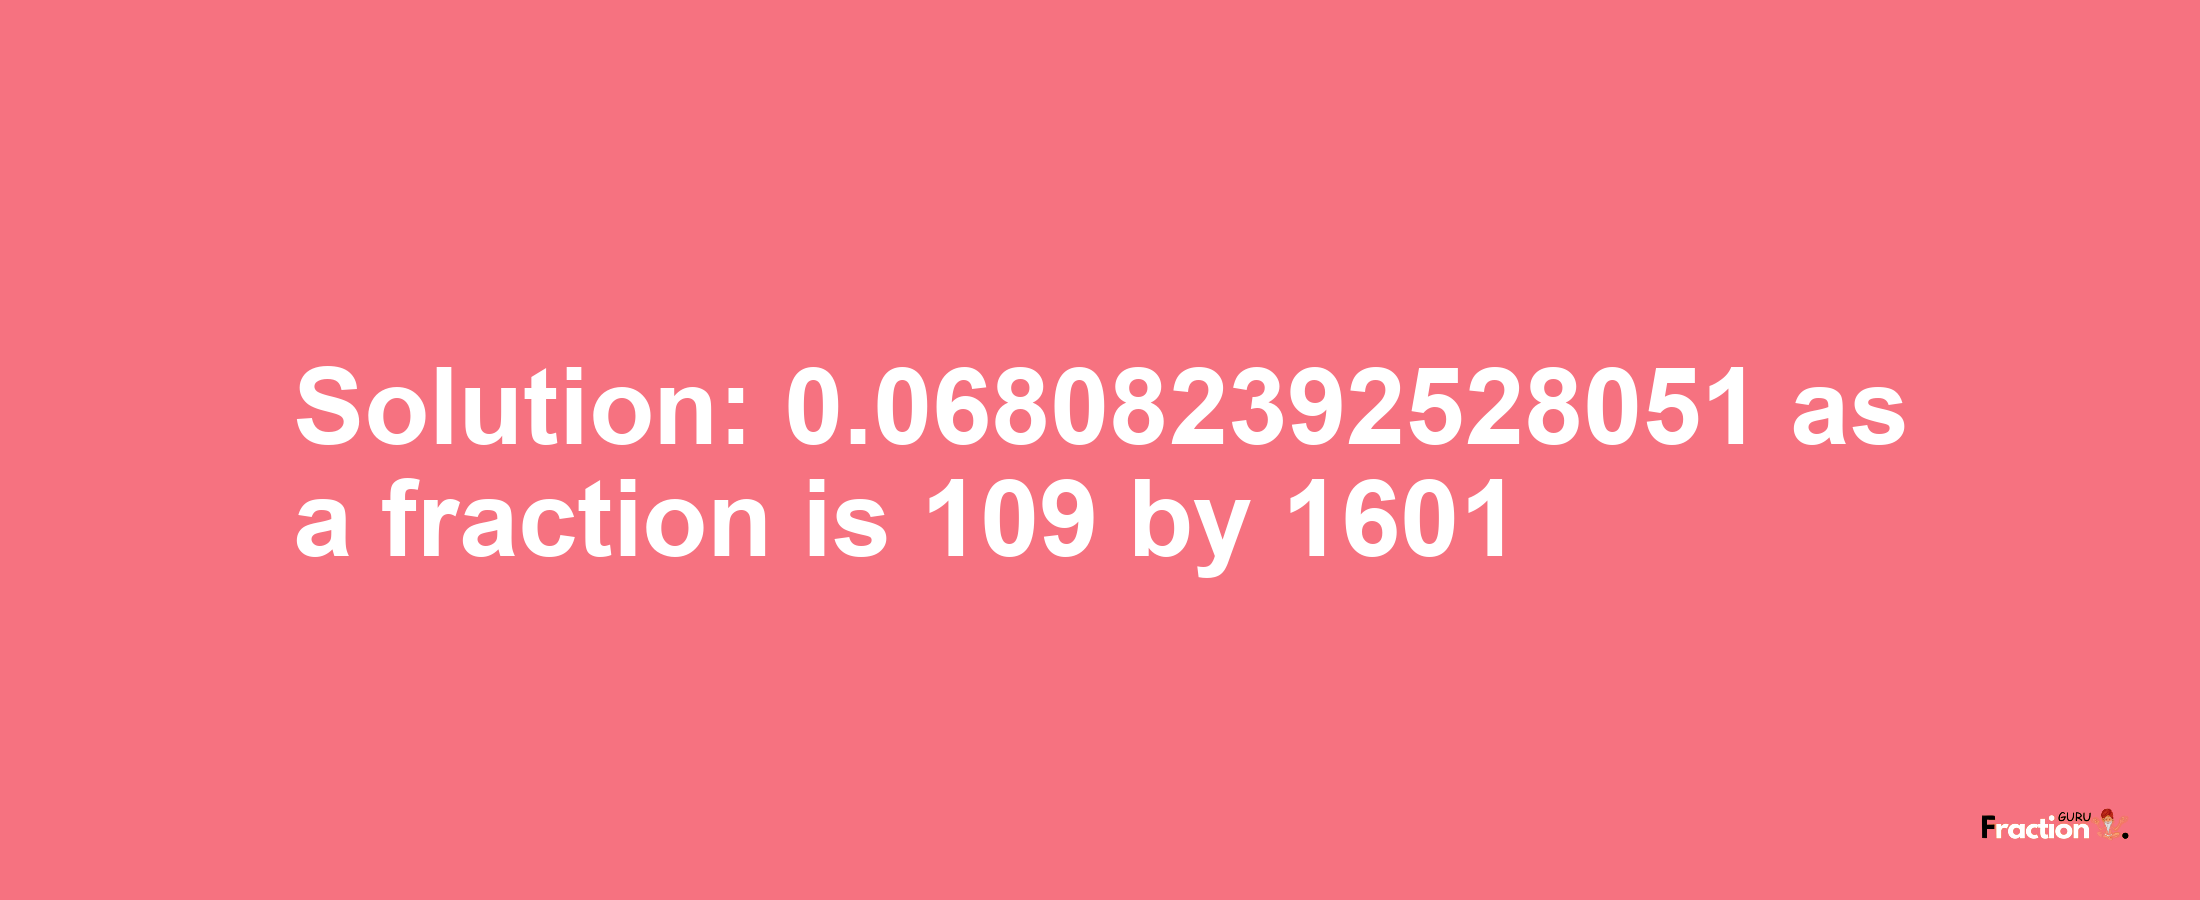 Solution:0.068082392528051 as a fraction is 109/1601